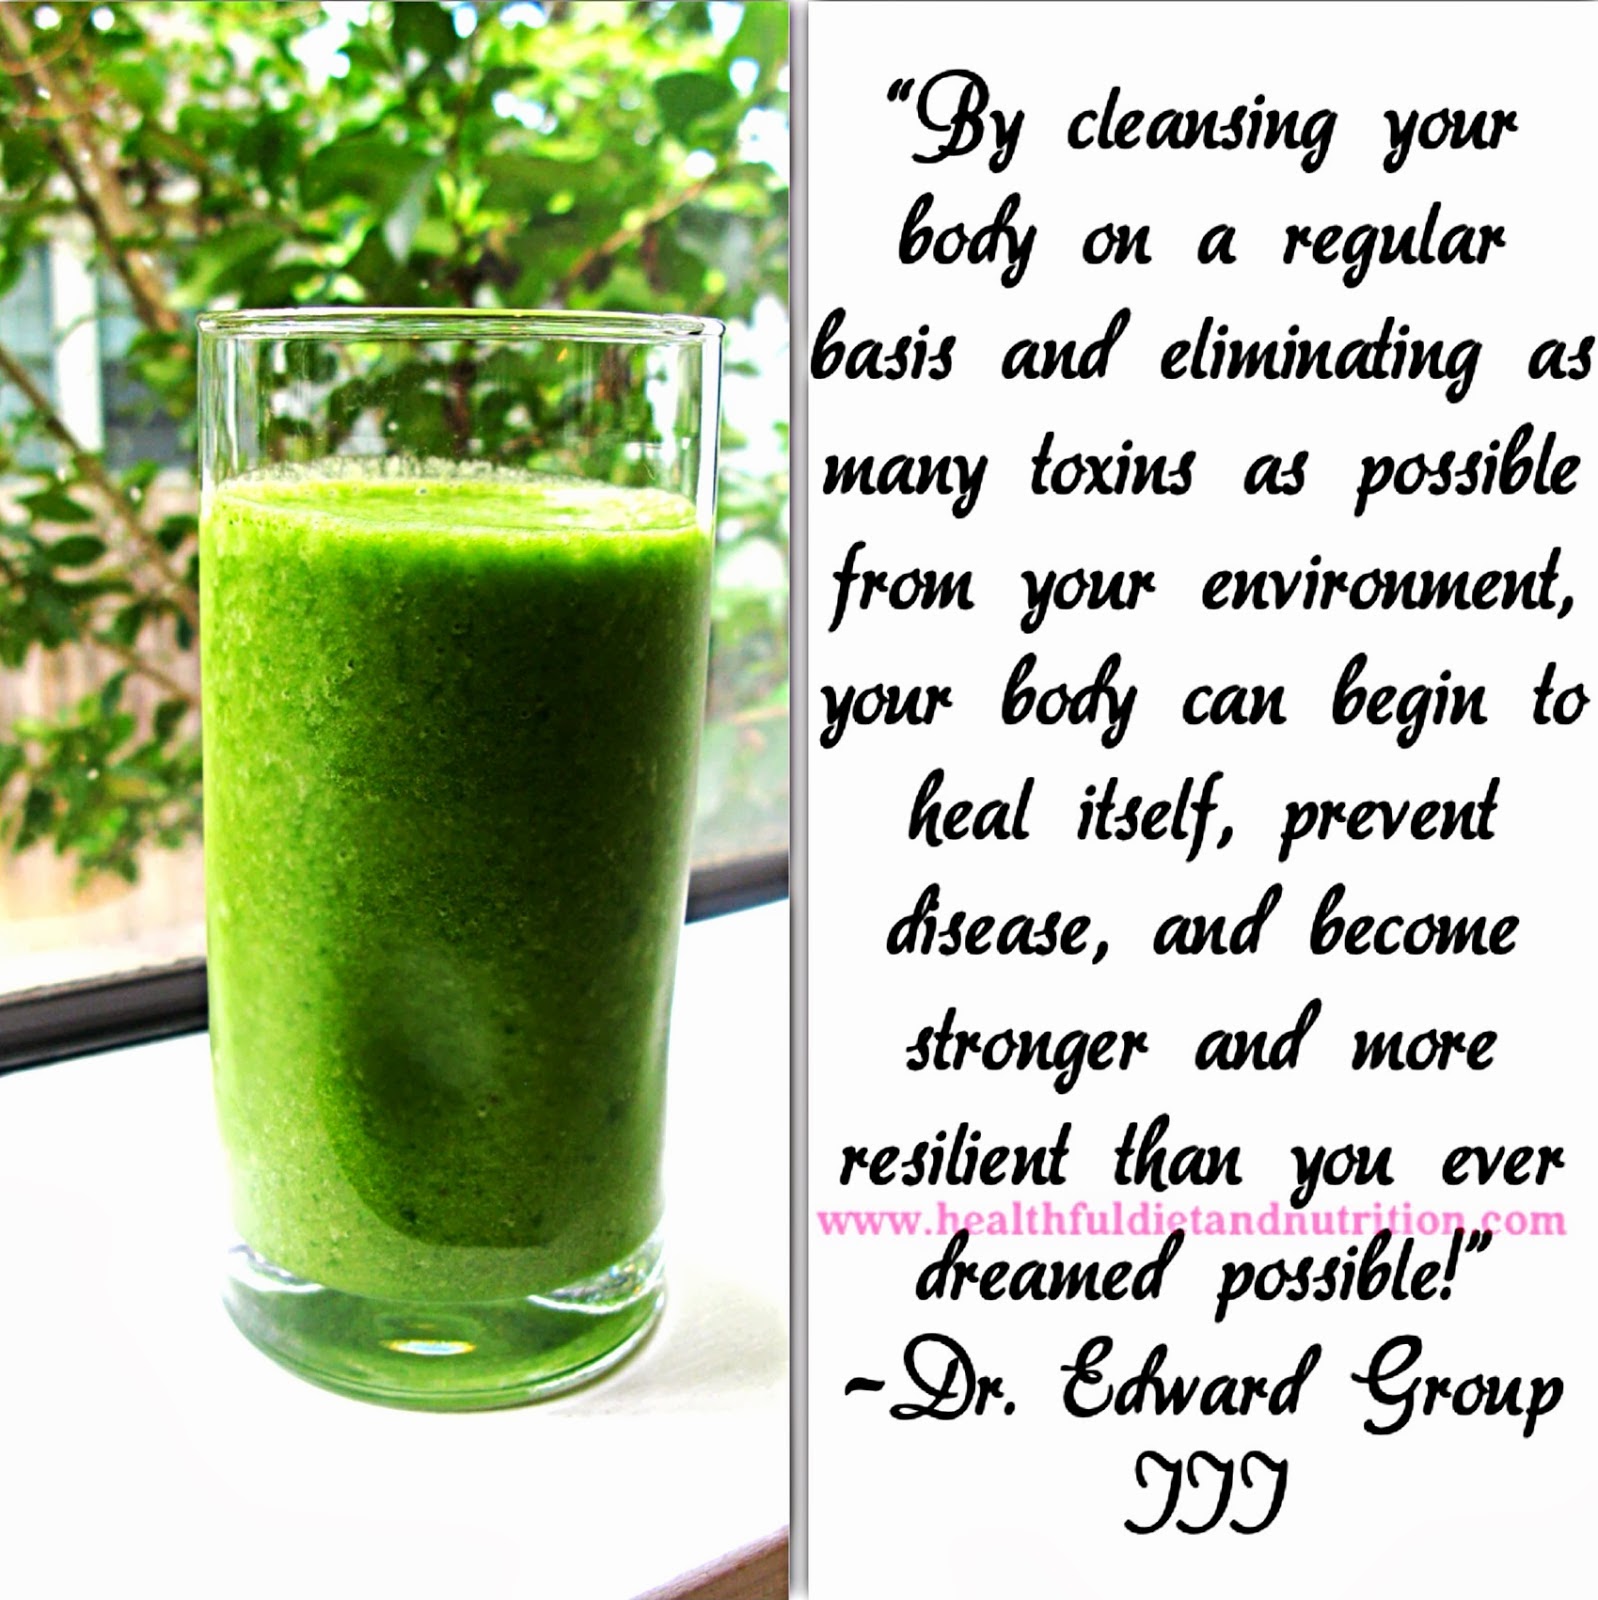 Cleanse Your Body On A Regular Basis